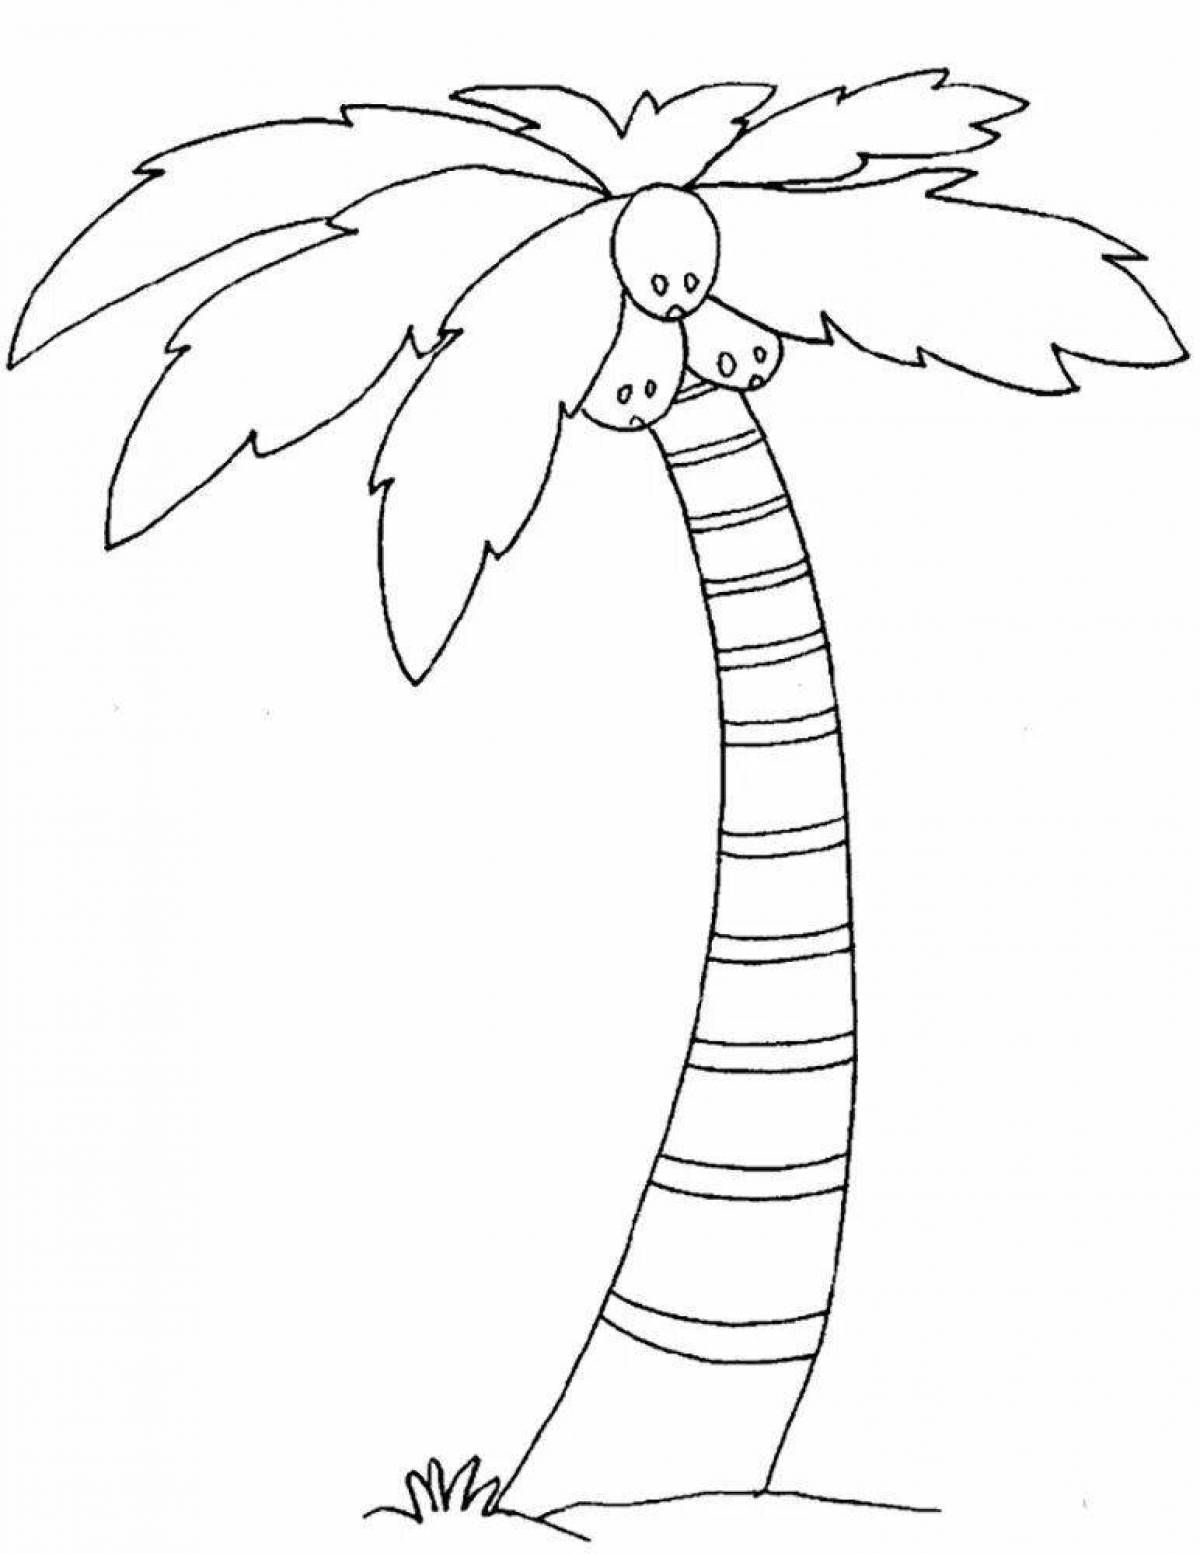 Innovative palm tree coloring page for kids